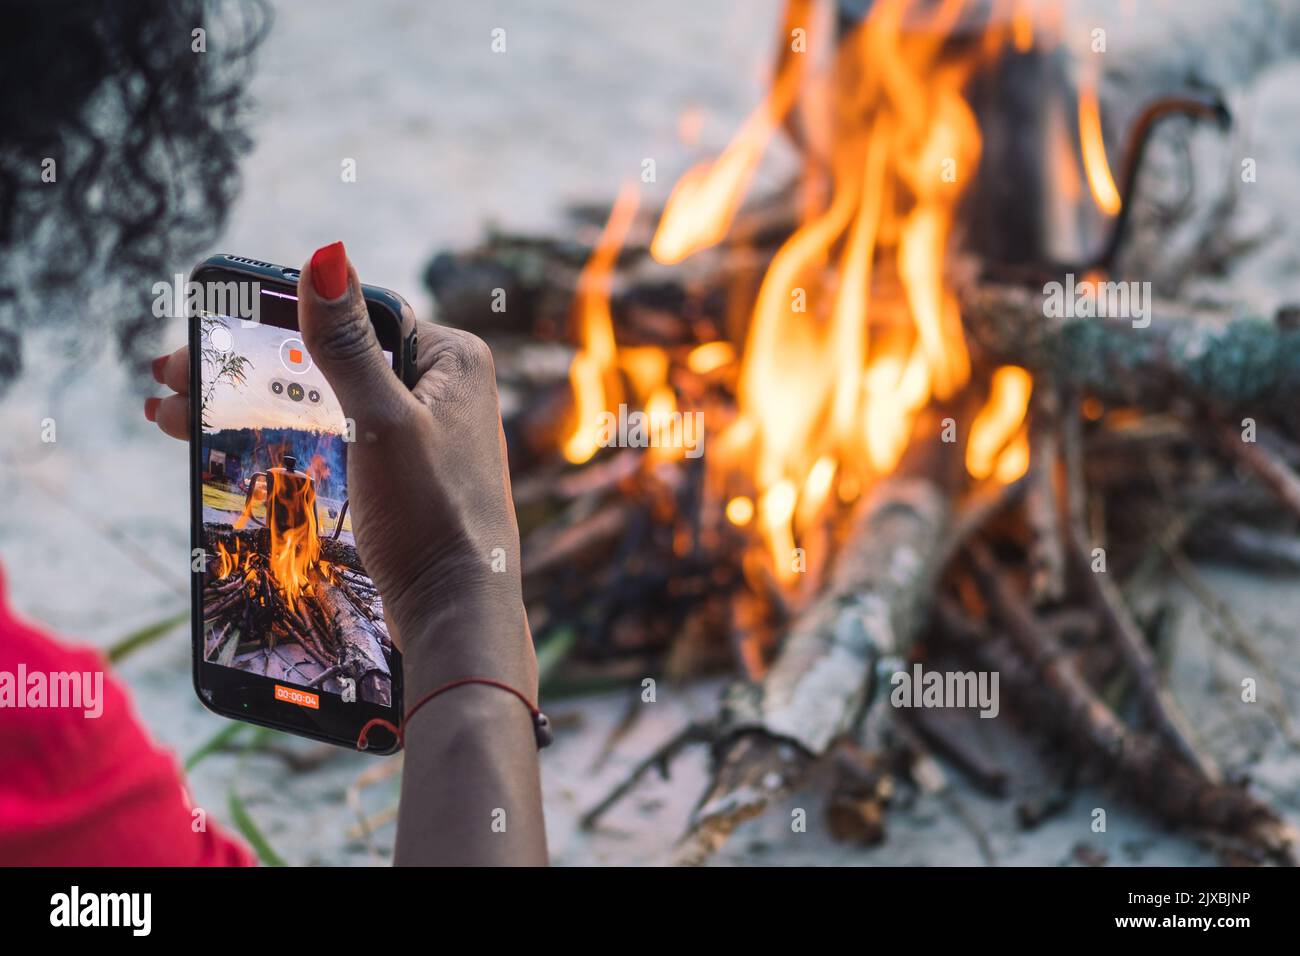 Girl taking photo or video with smartphone while preparing coffee or tea on a bonfire with branches and flames outdoor in the nature Stock Photo